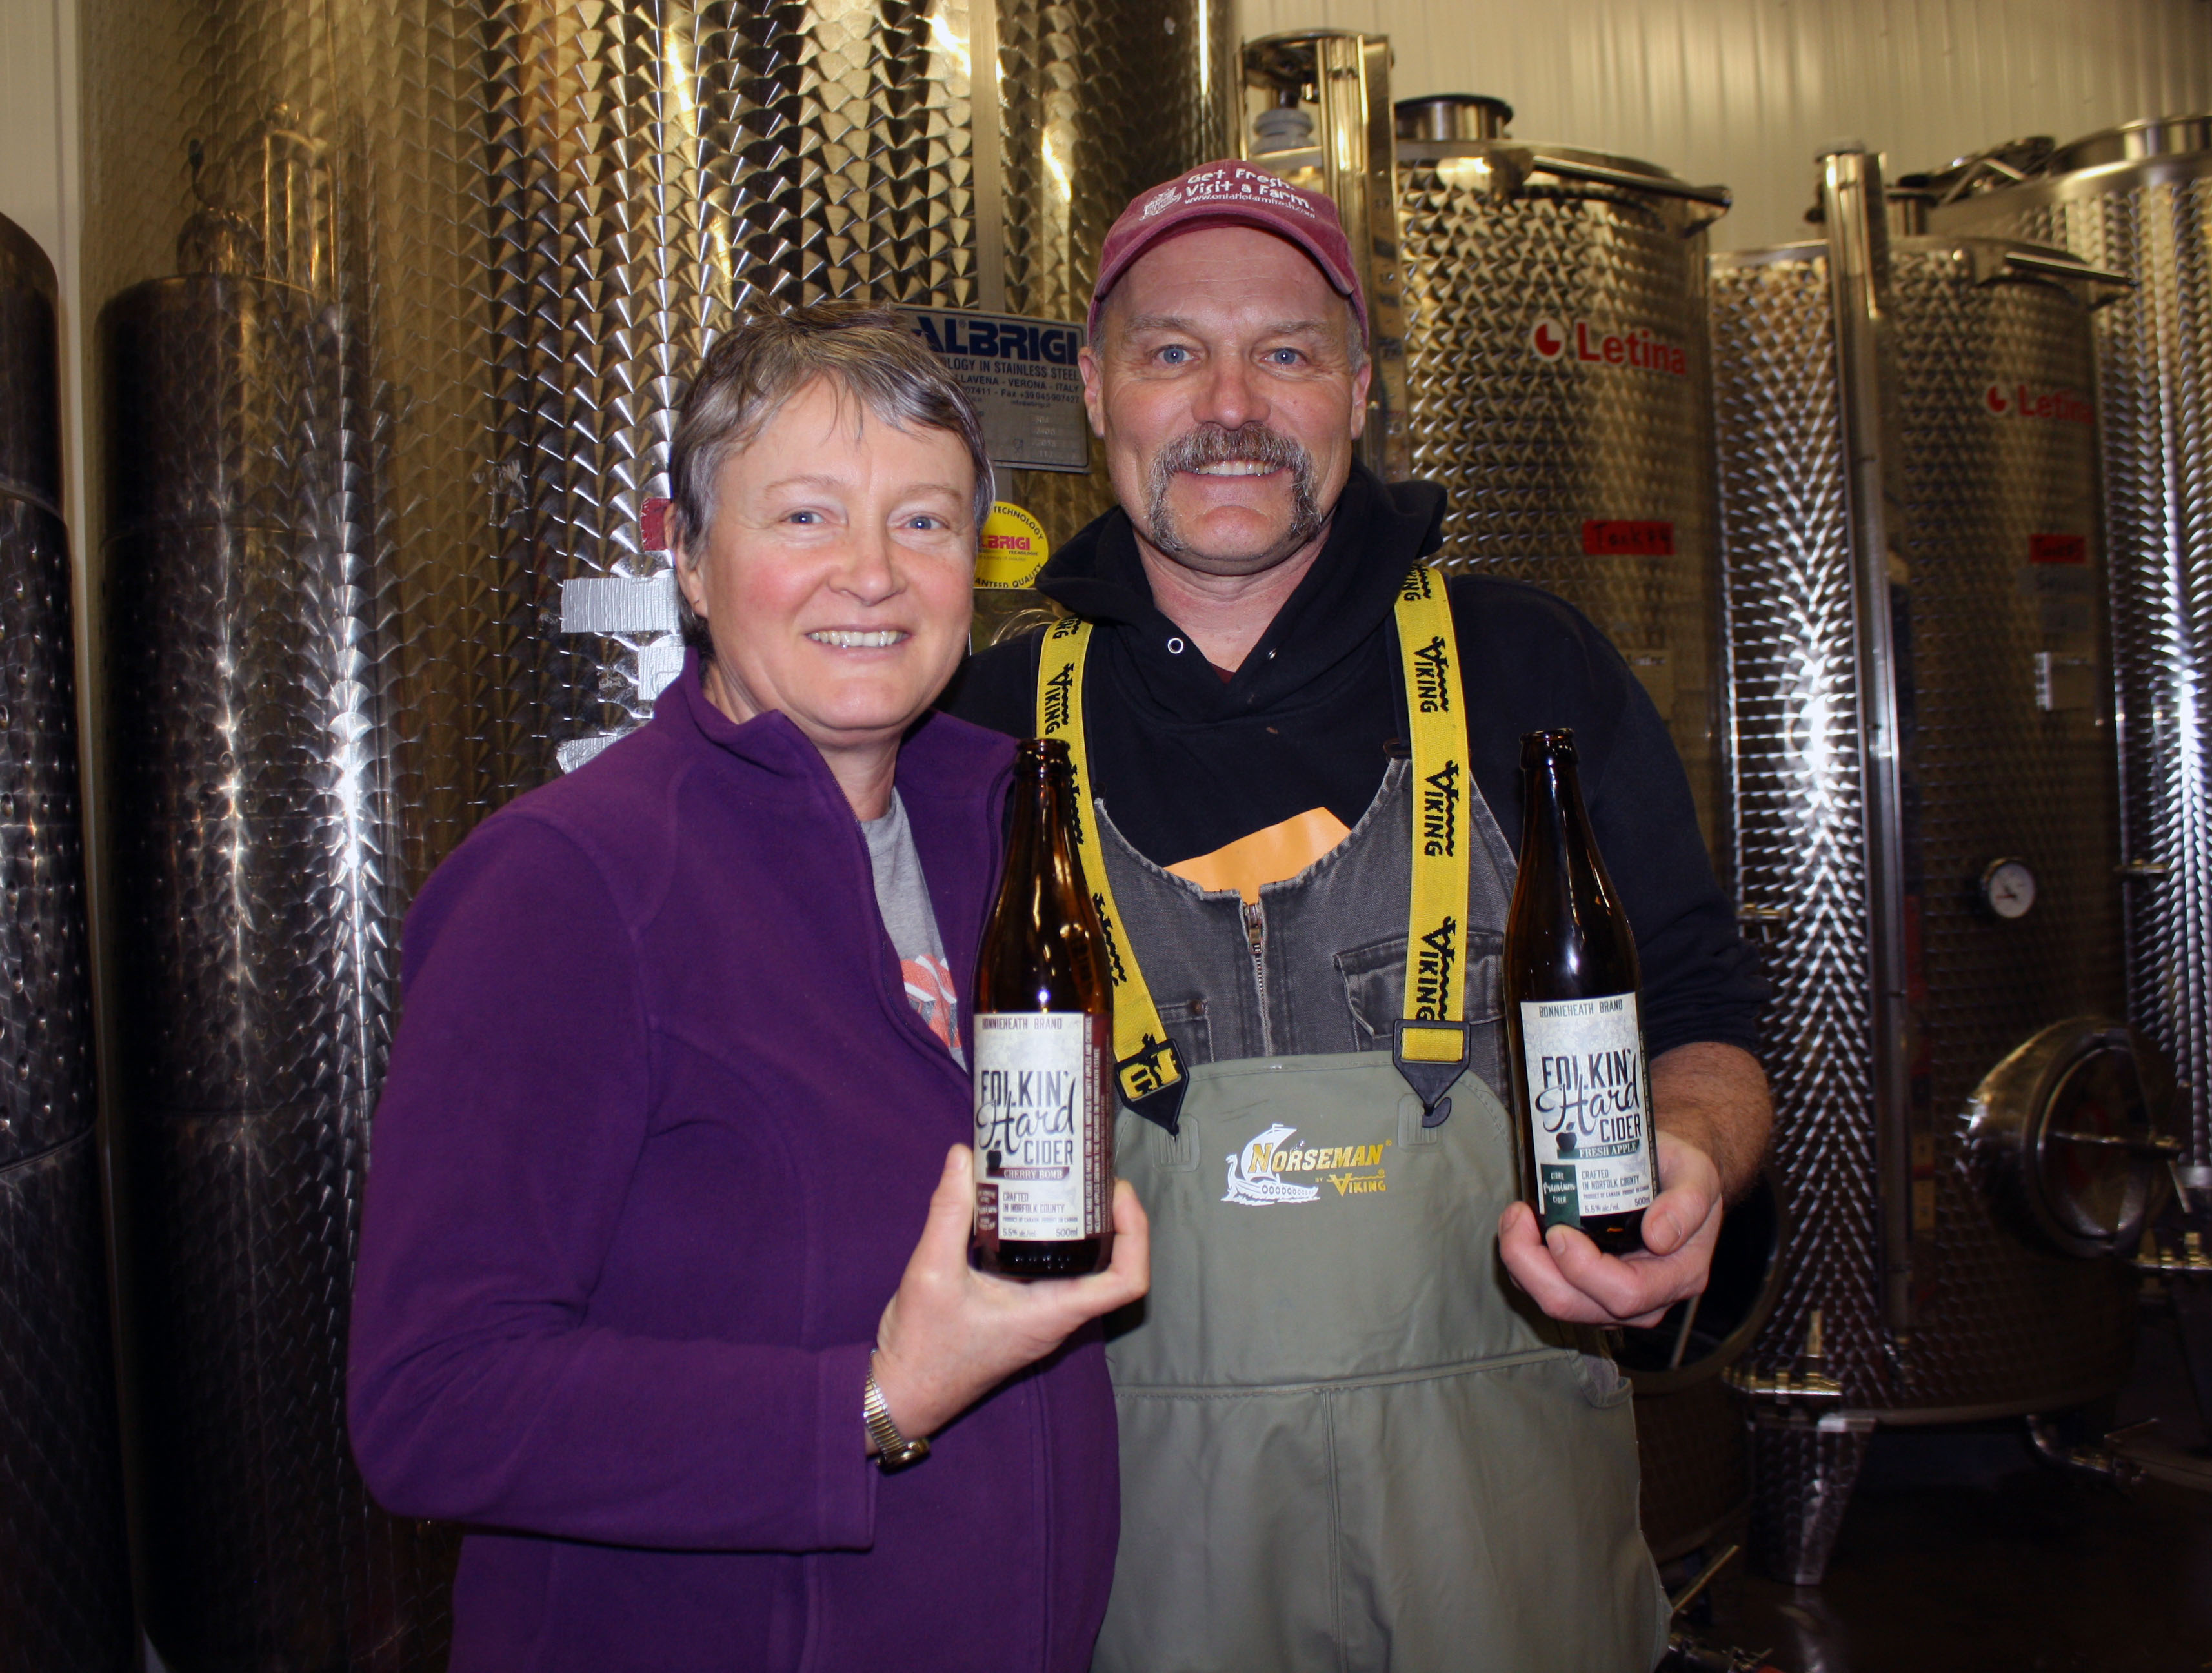 Bonnieheath Estate Lavender and Winery owners Anita and Steve Buehner